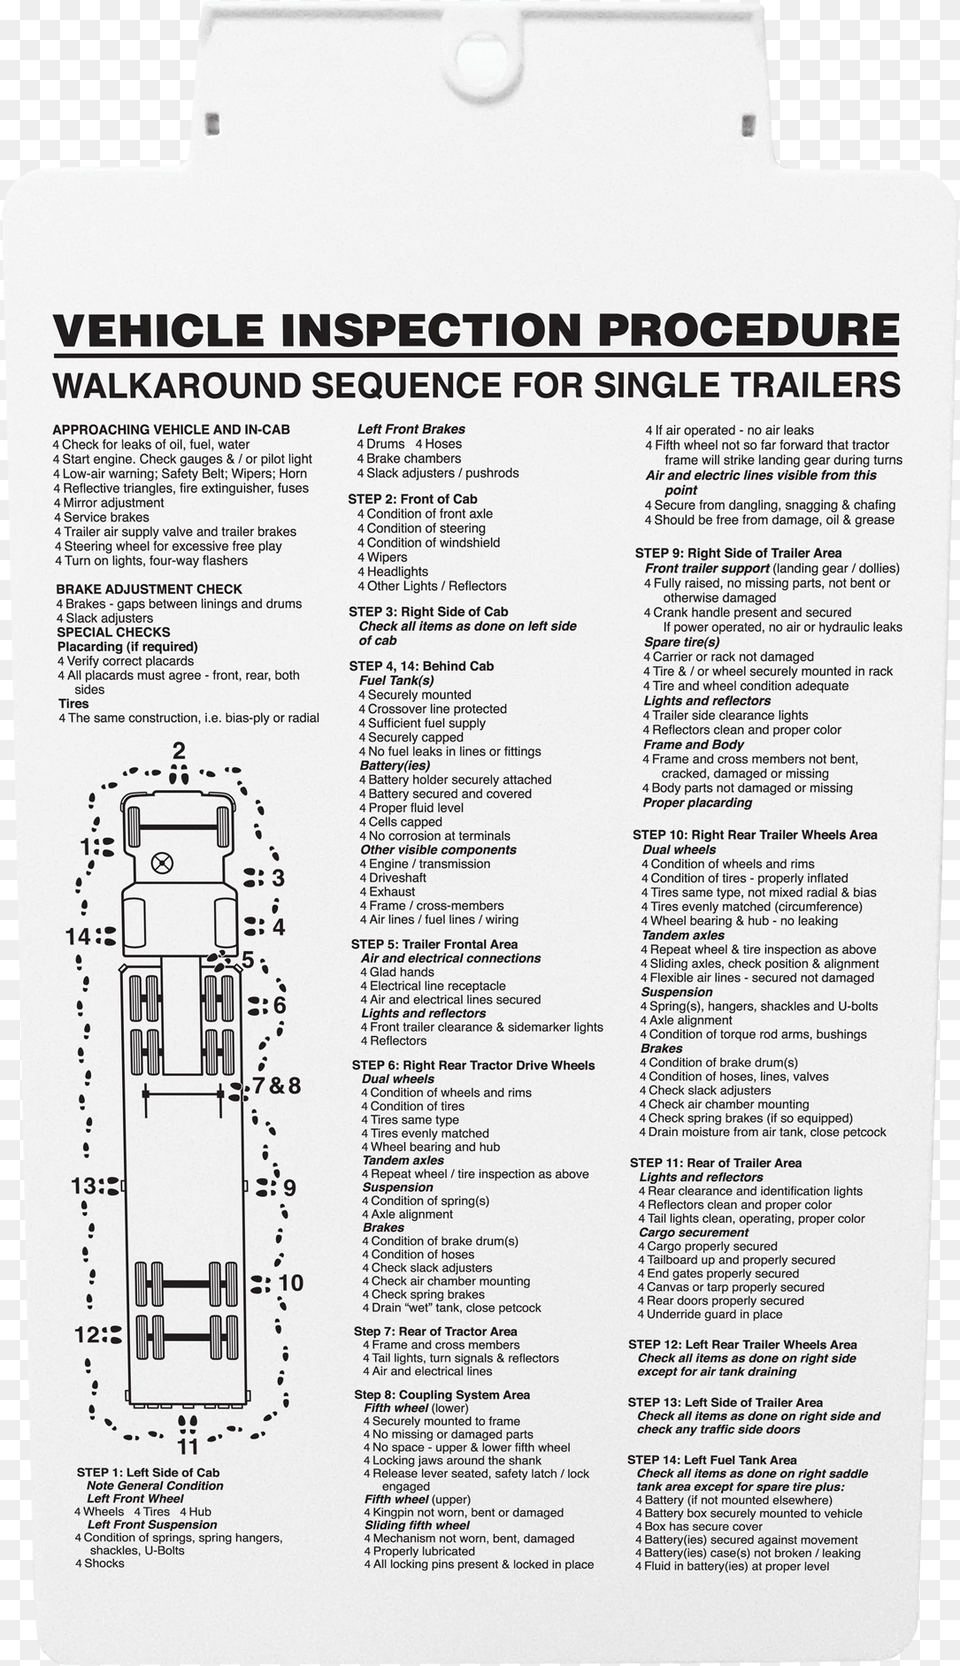 Walk Aroundhirespic Seduc Pa, Page, Text Png